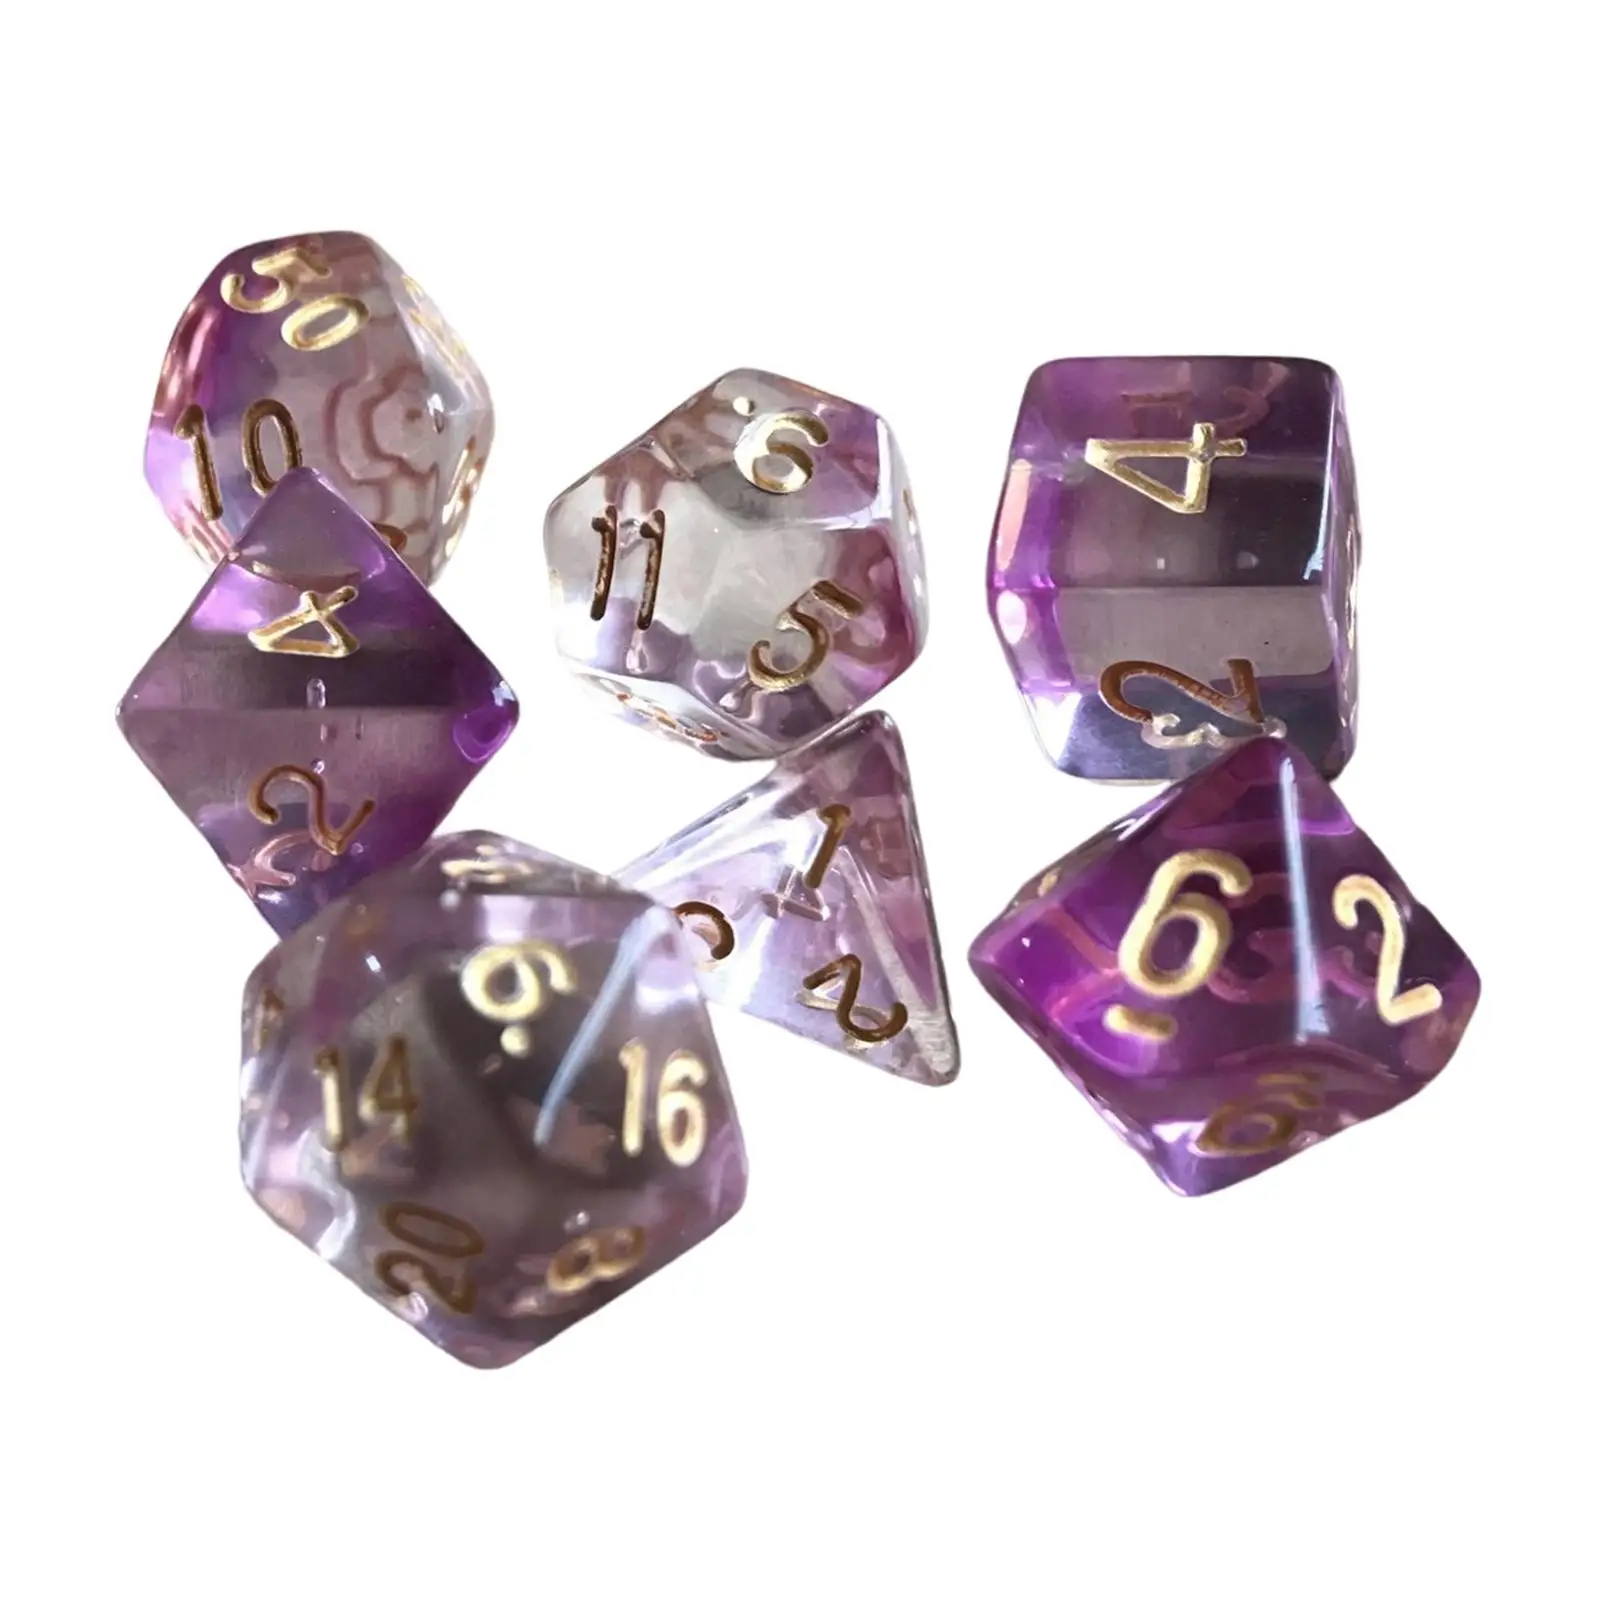 7x Polyhedral Dice D4 D6 D8 D10 D12  Game for Cafe Table Board Bar